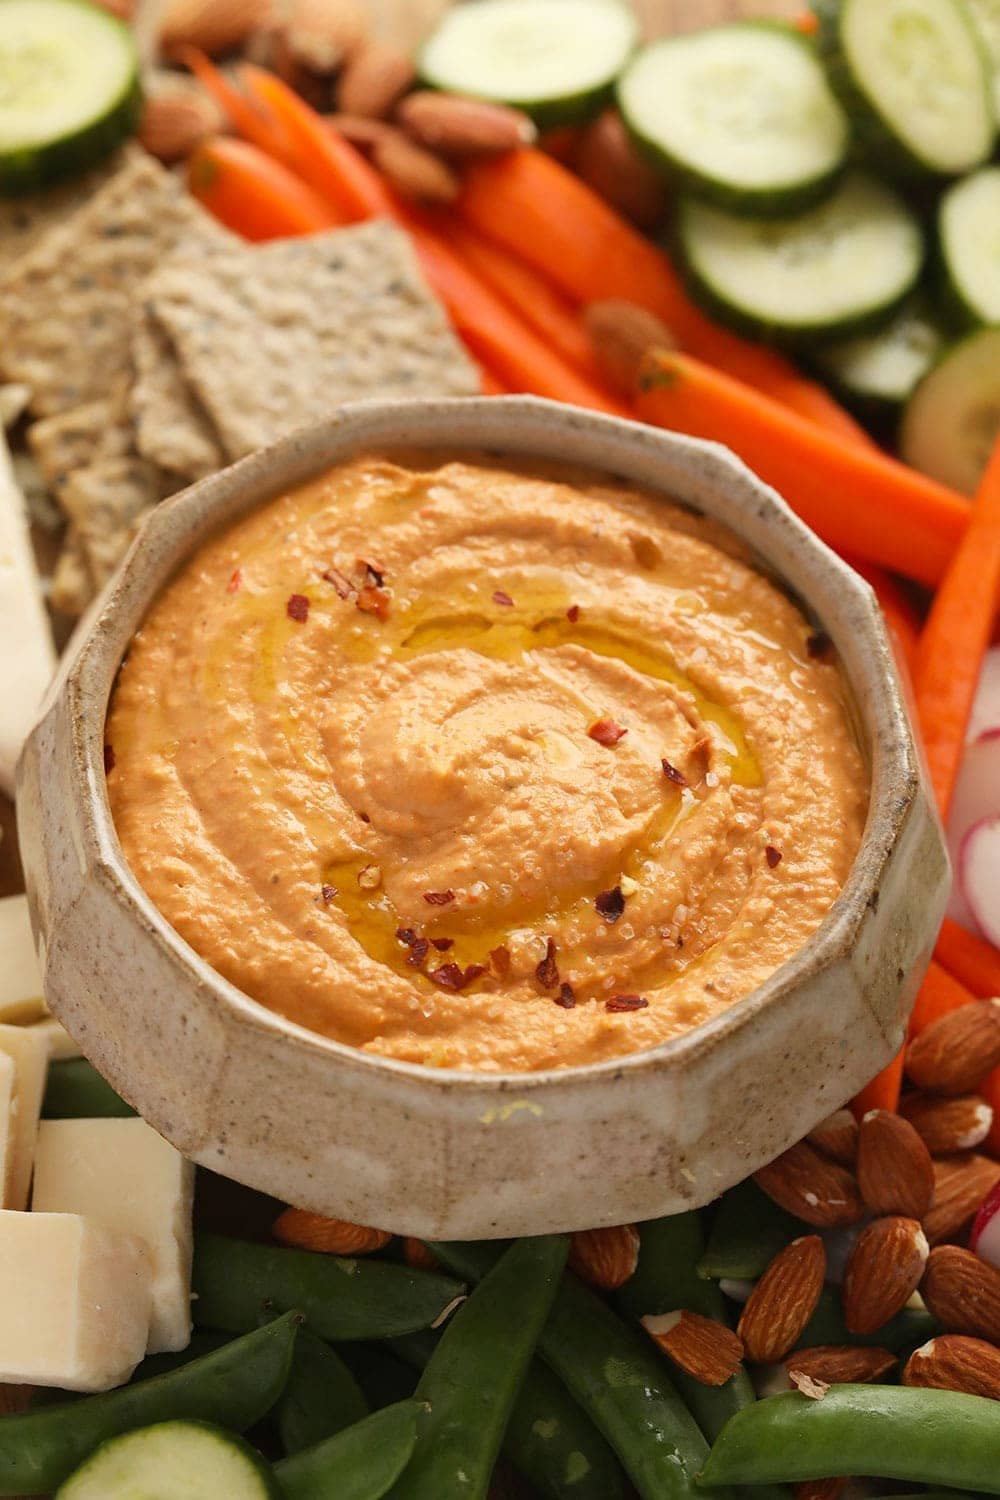 roasted red pepper hummus surrounded by crackers, sliced veggies and crackers